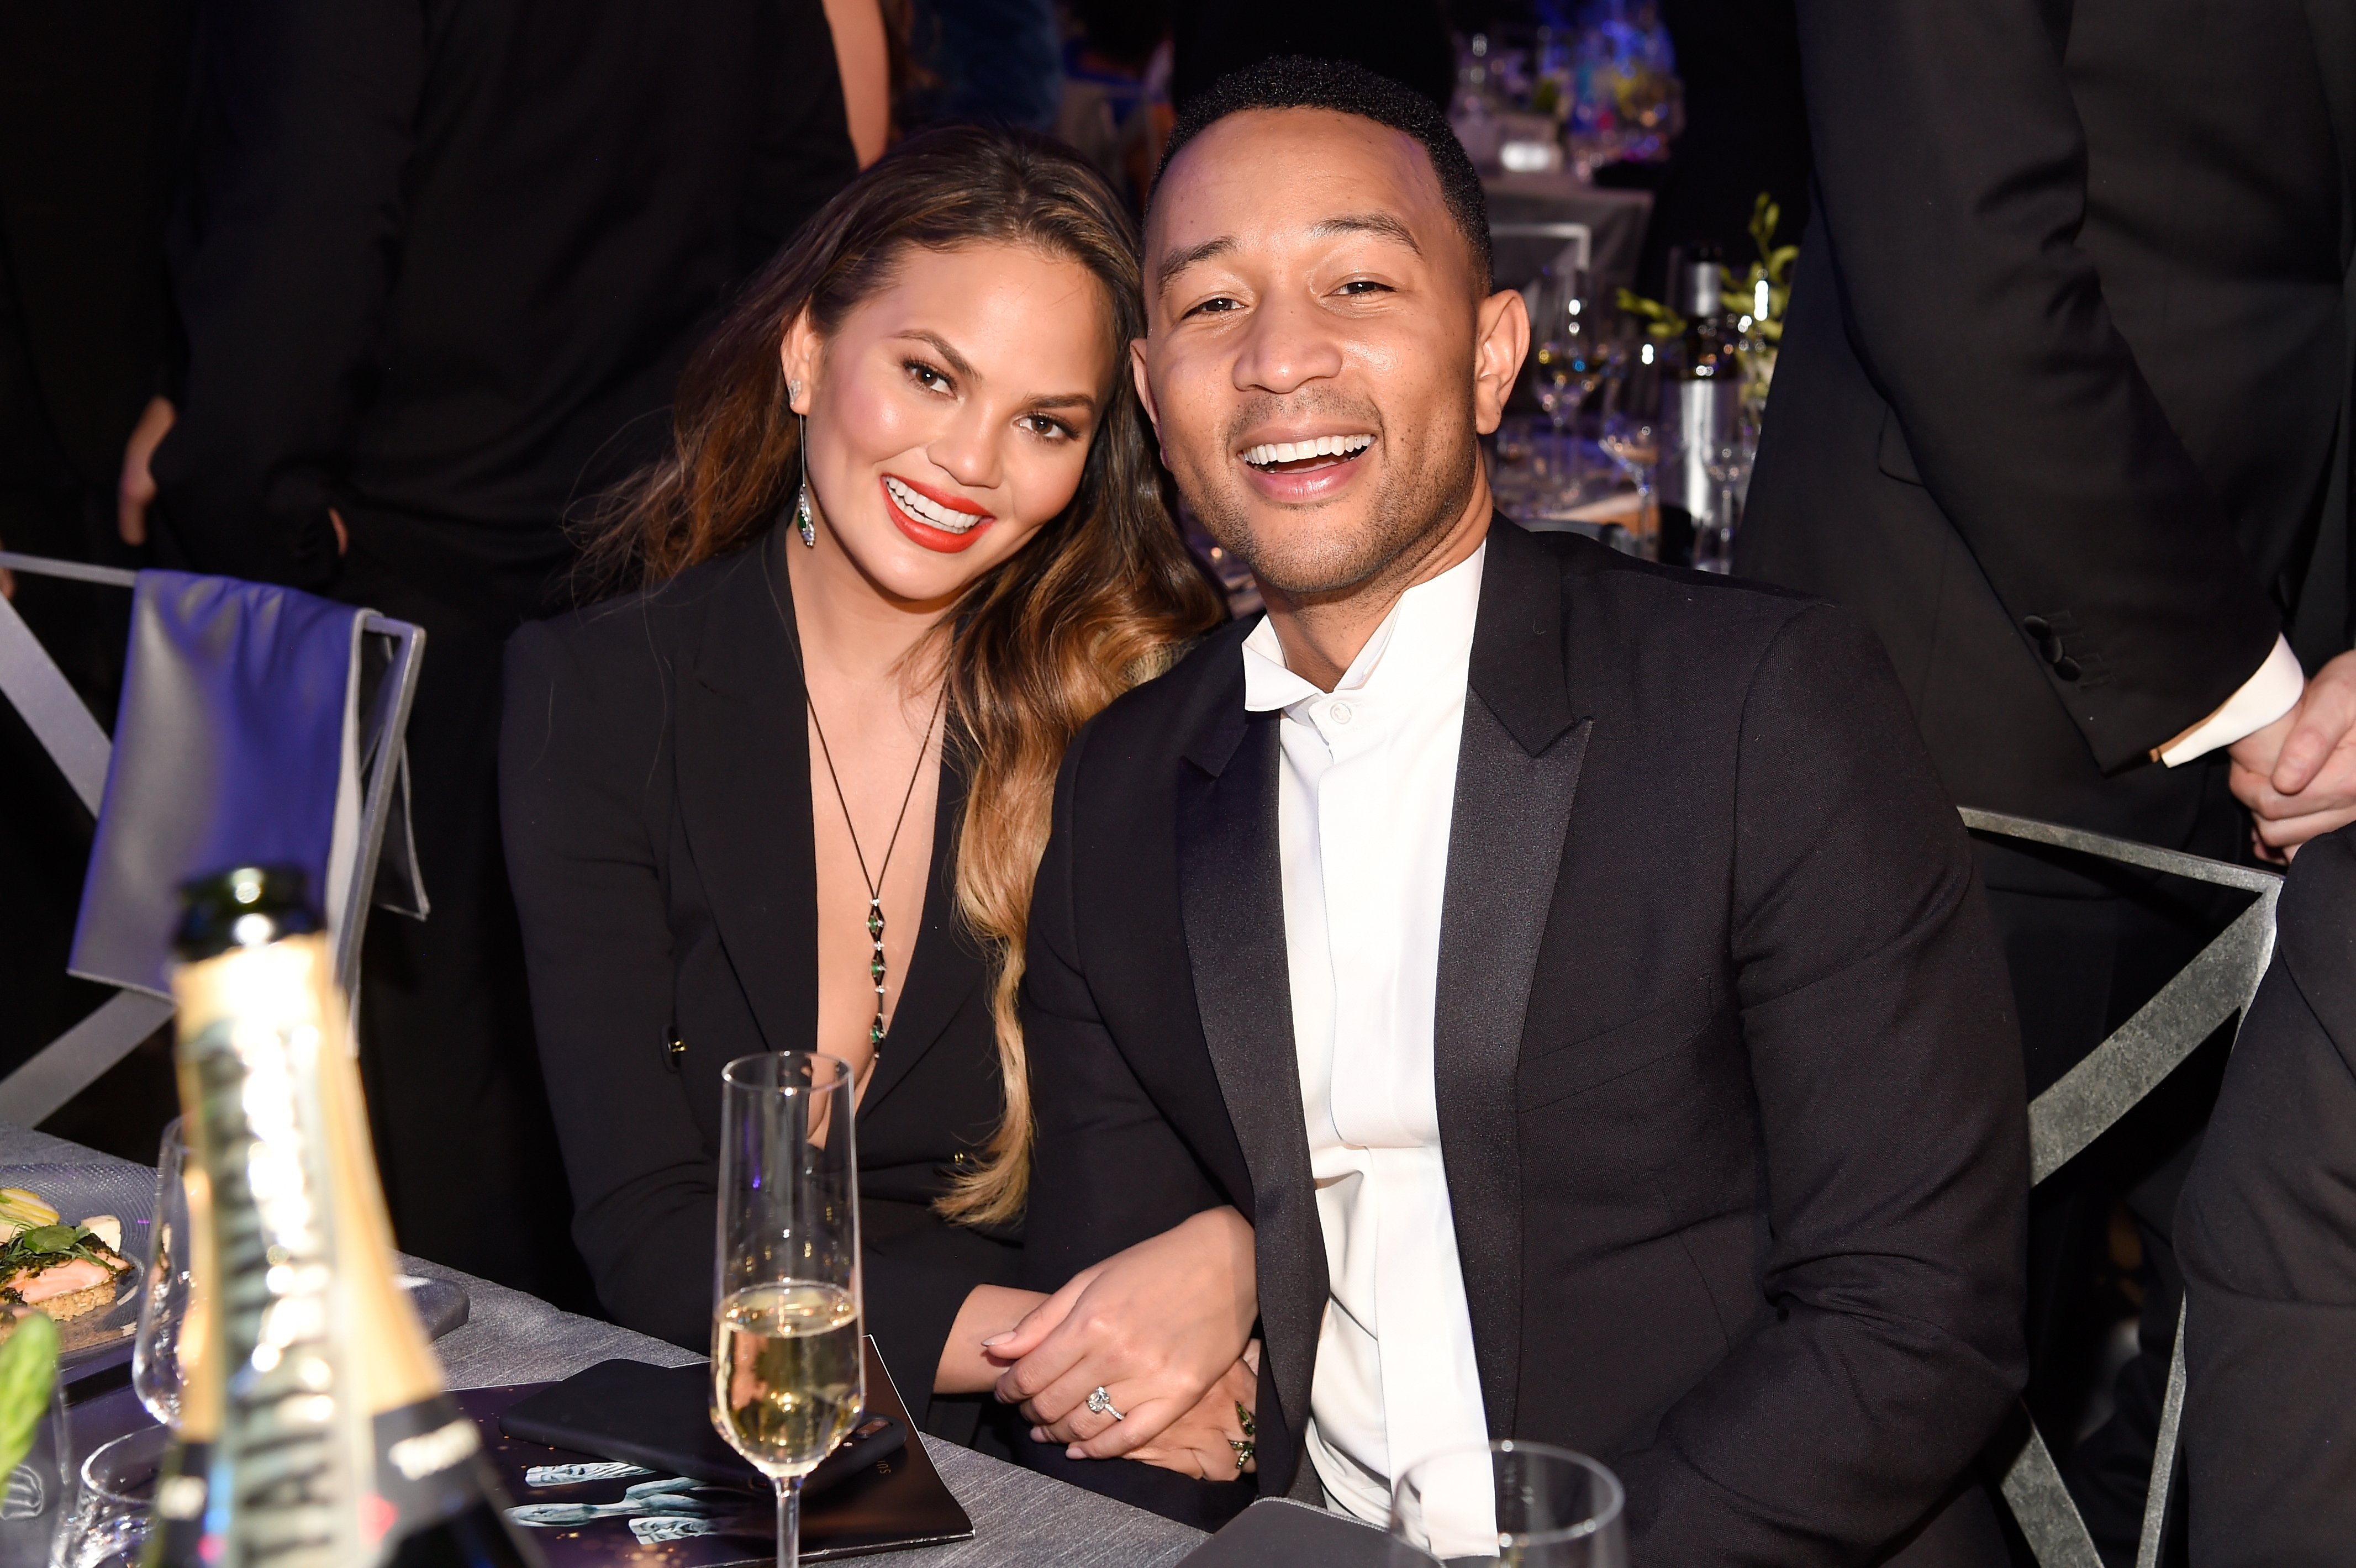 Chrissy Teigen and John Legend during The 23rd Annual Screen Actors Guild Awards at The Shrine Auditorium on January 29, 2017. | Source: Getty Images